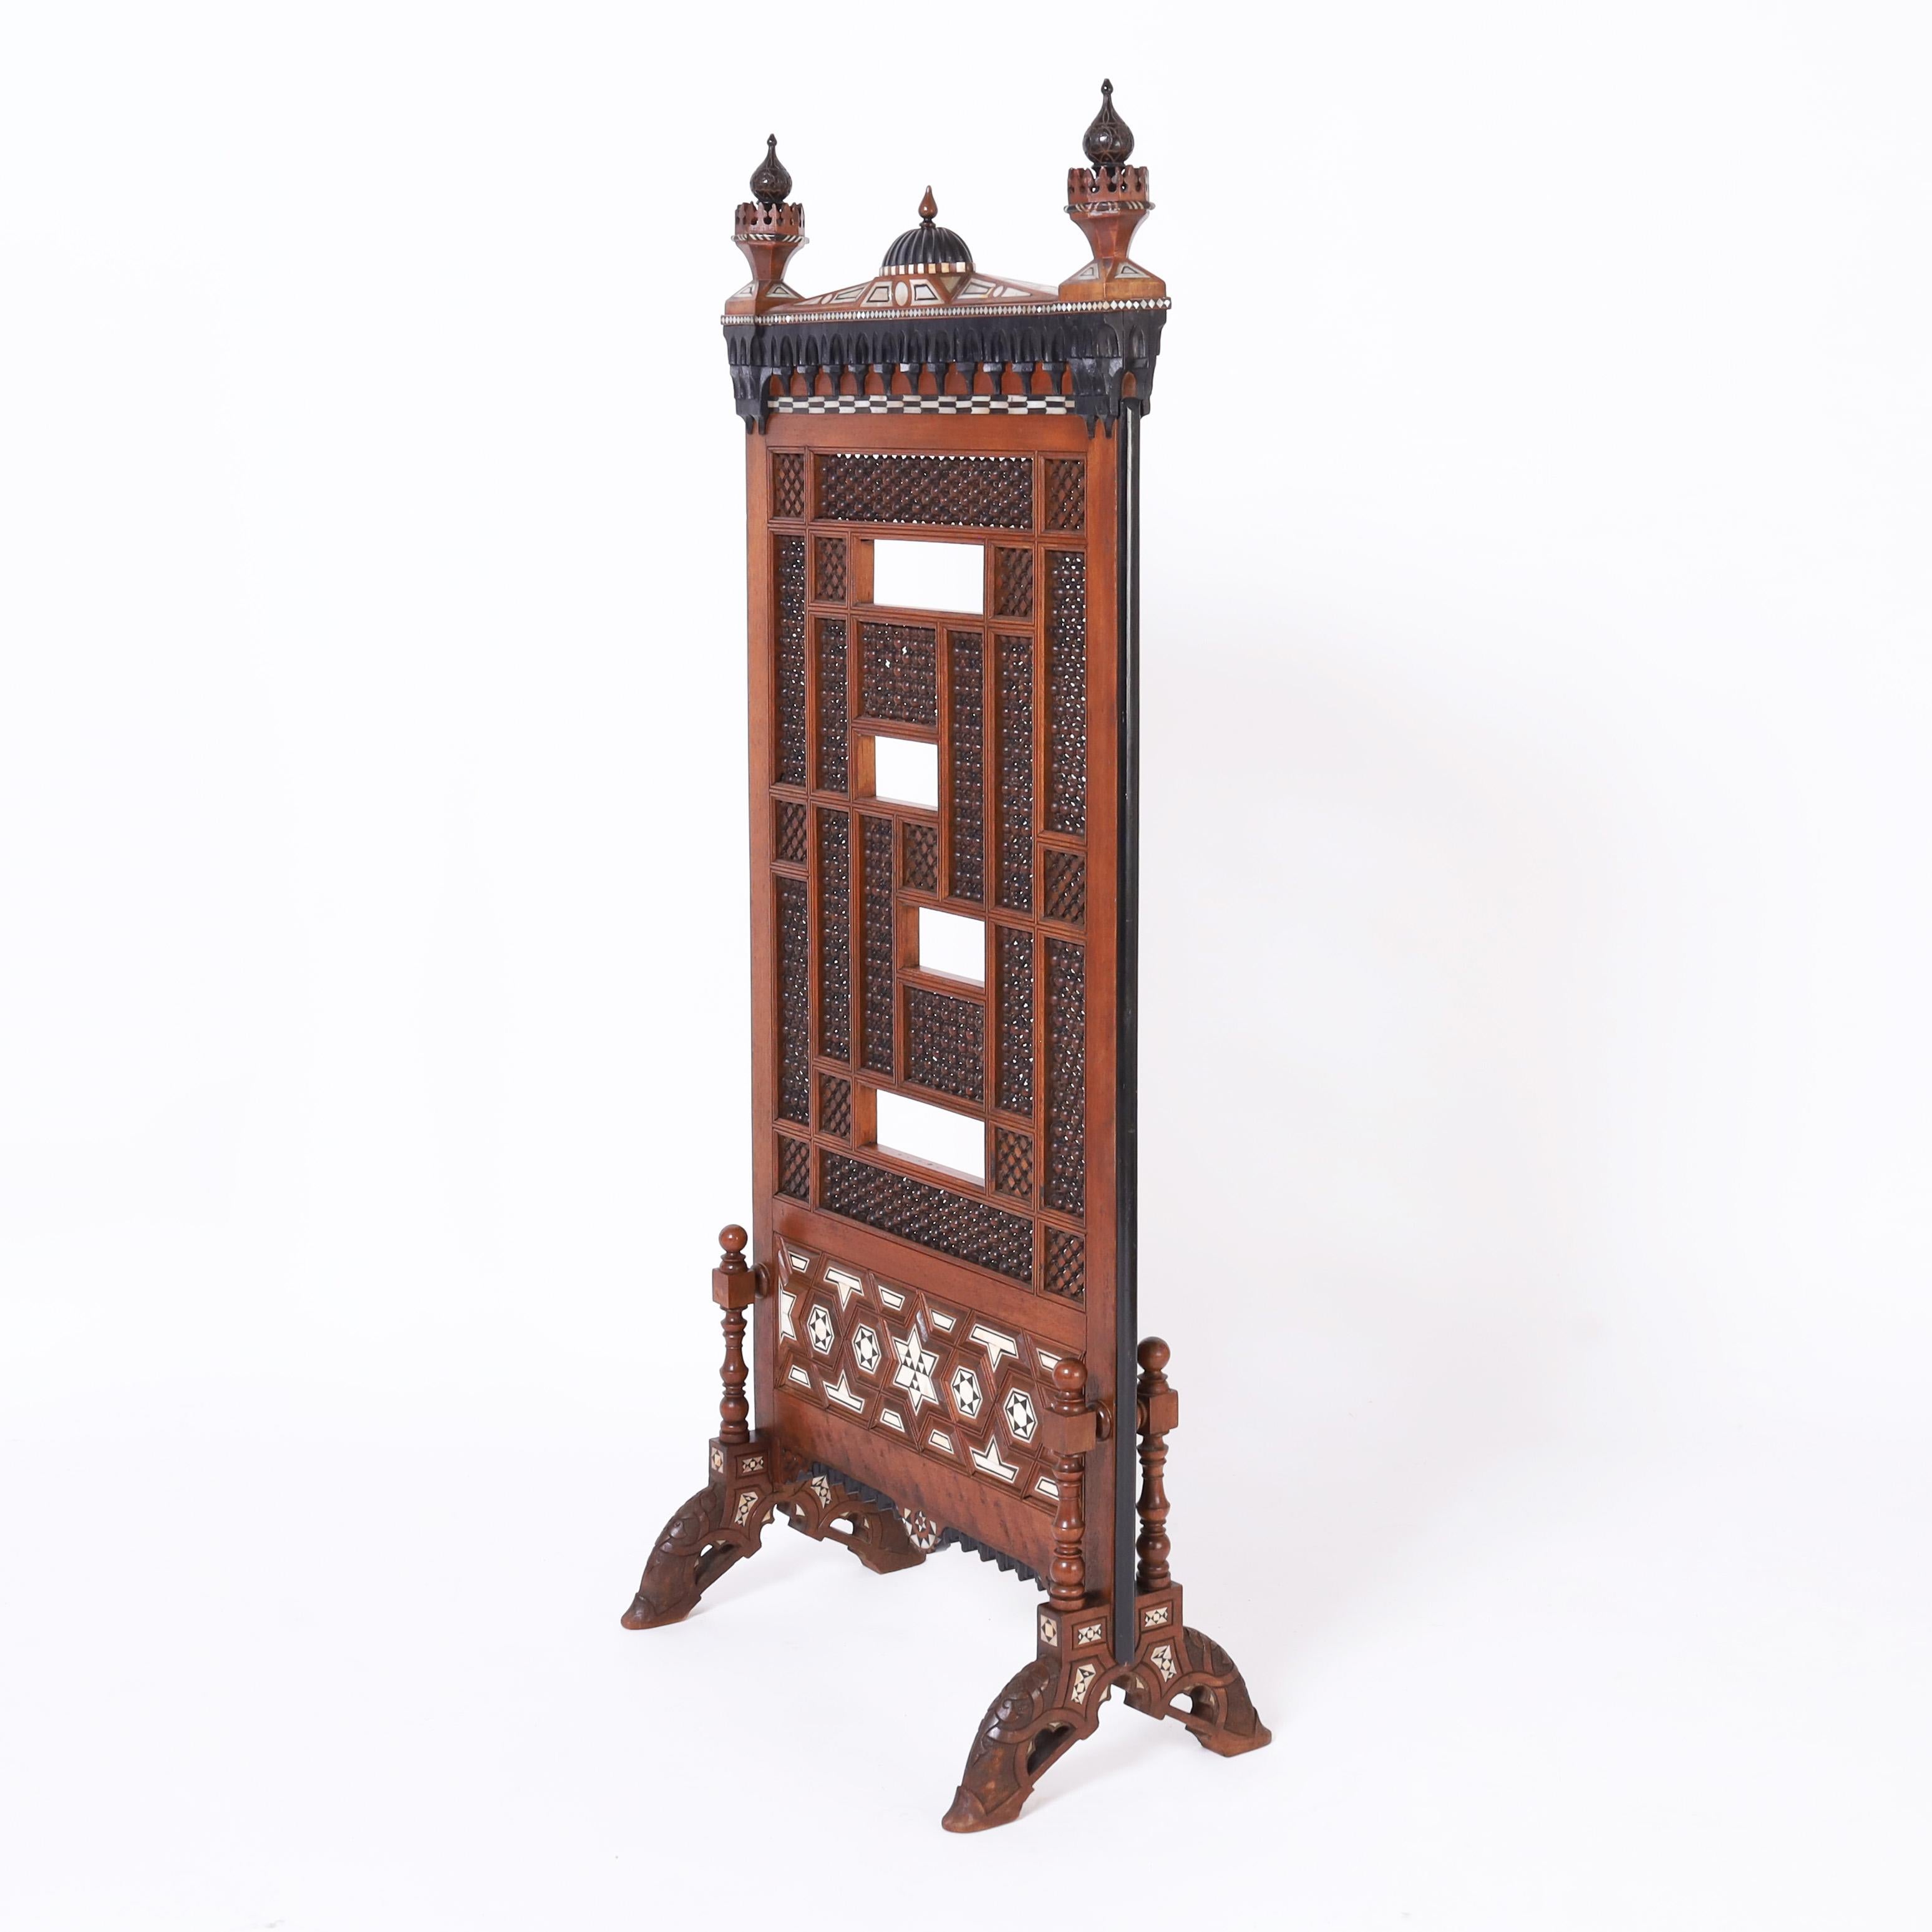 Antique Moroccan screen crafted with mahogany in an architecturally interesting form featuring onion dome finials, geometric inlays of mother of pearl, bone and ebony, with carved and ebonized reliefs, stick and ball panels, turned supports and